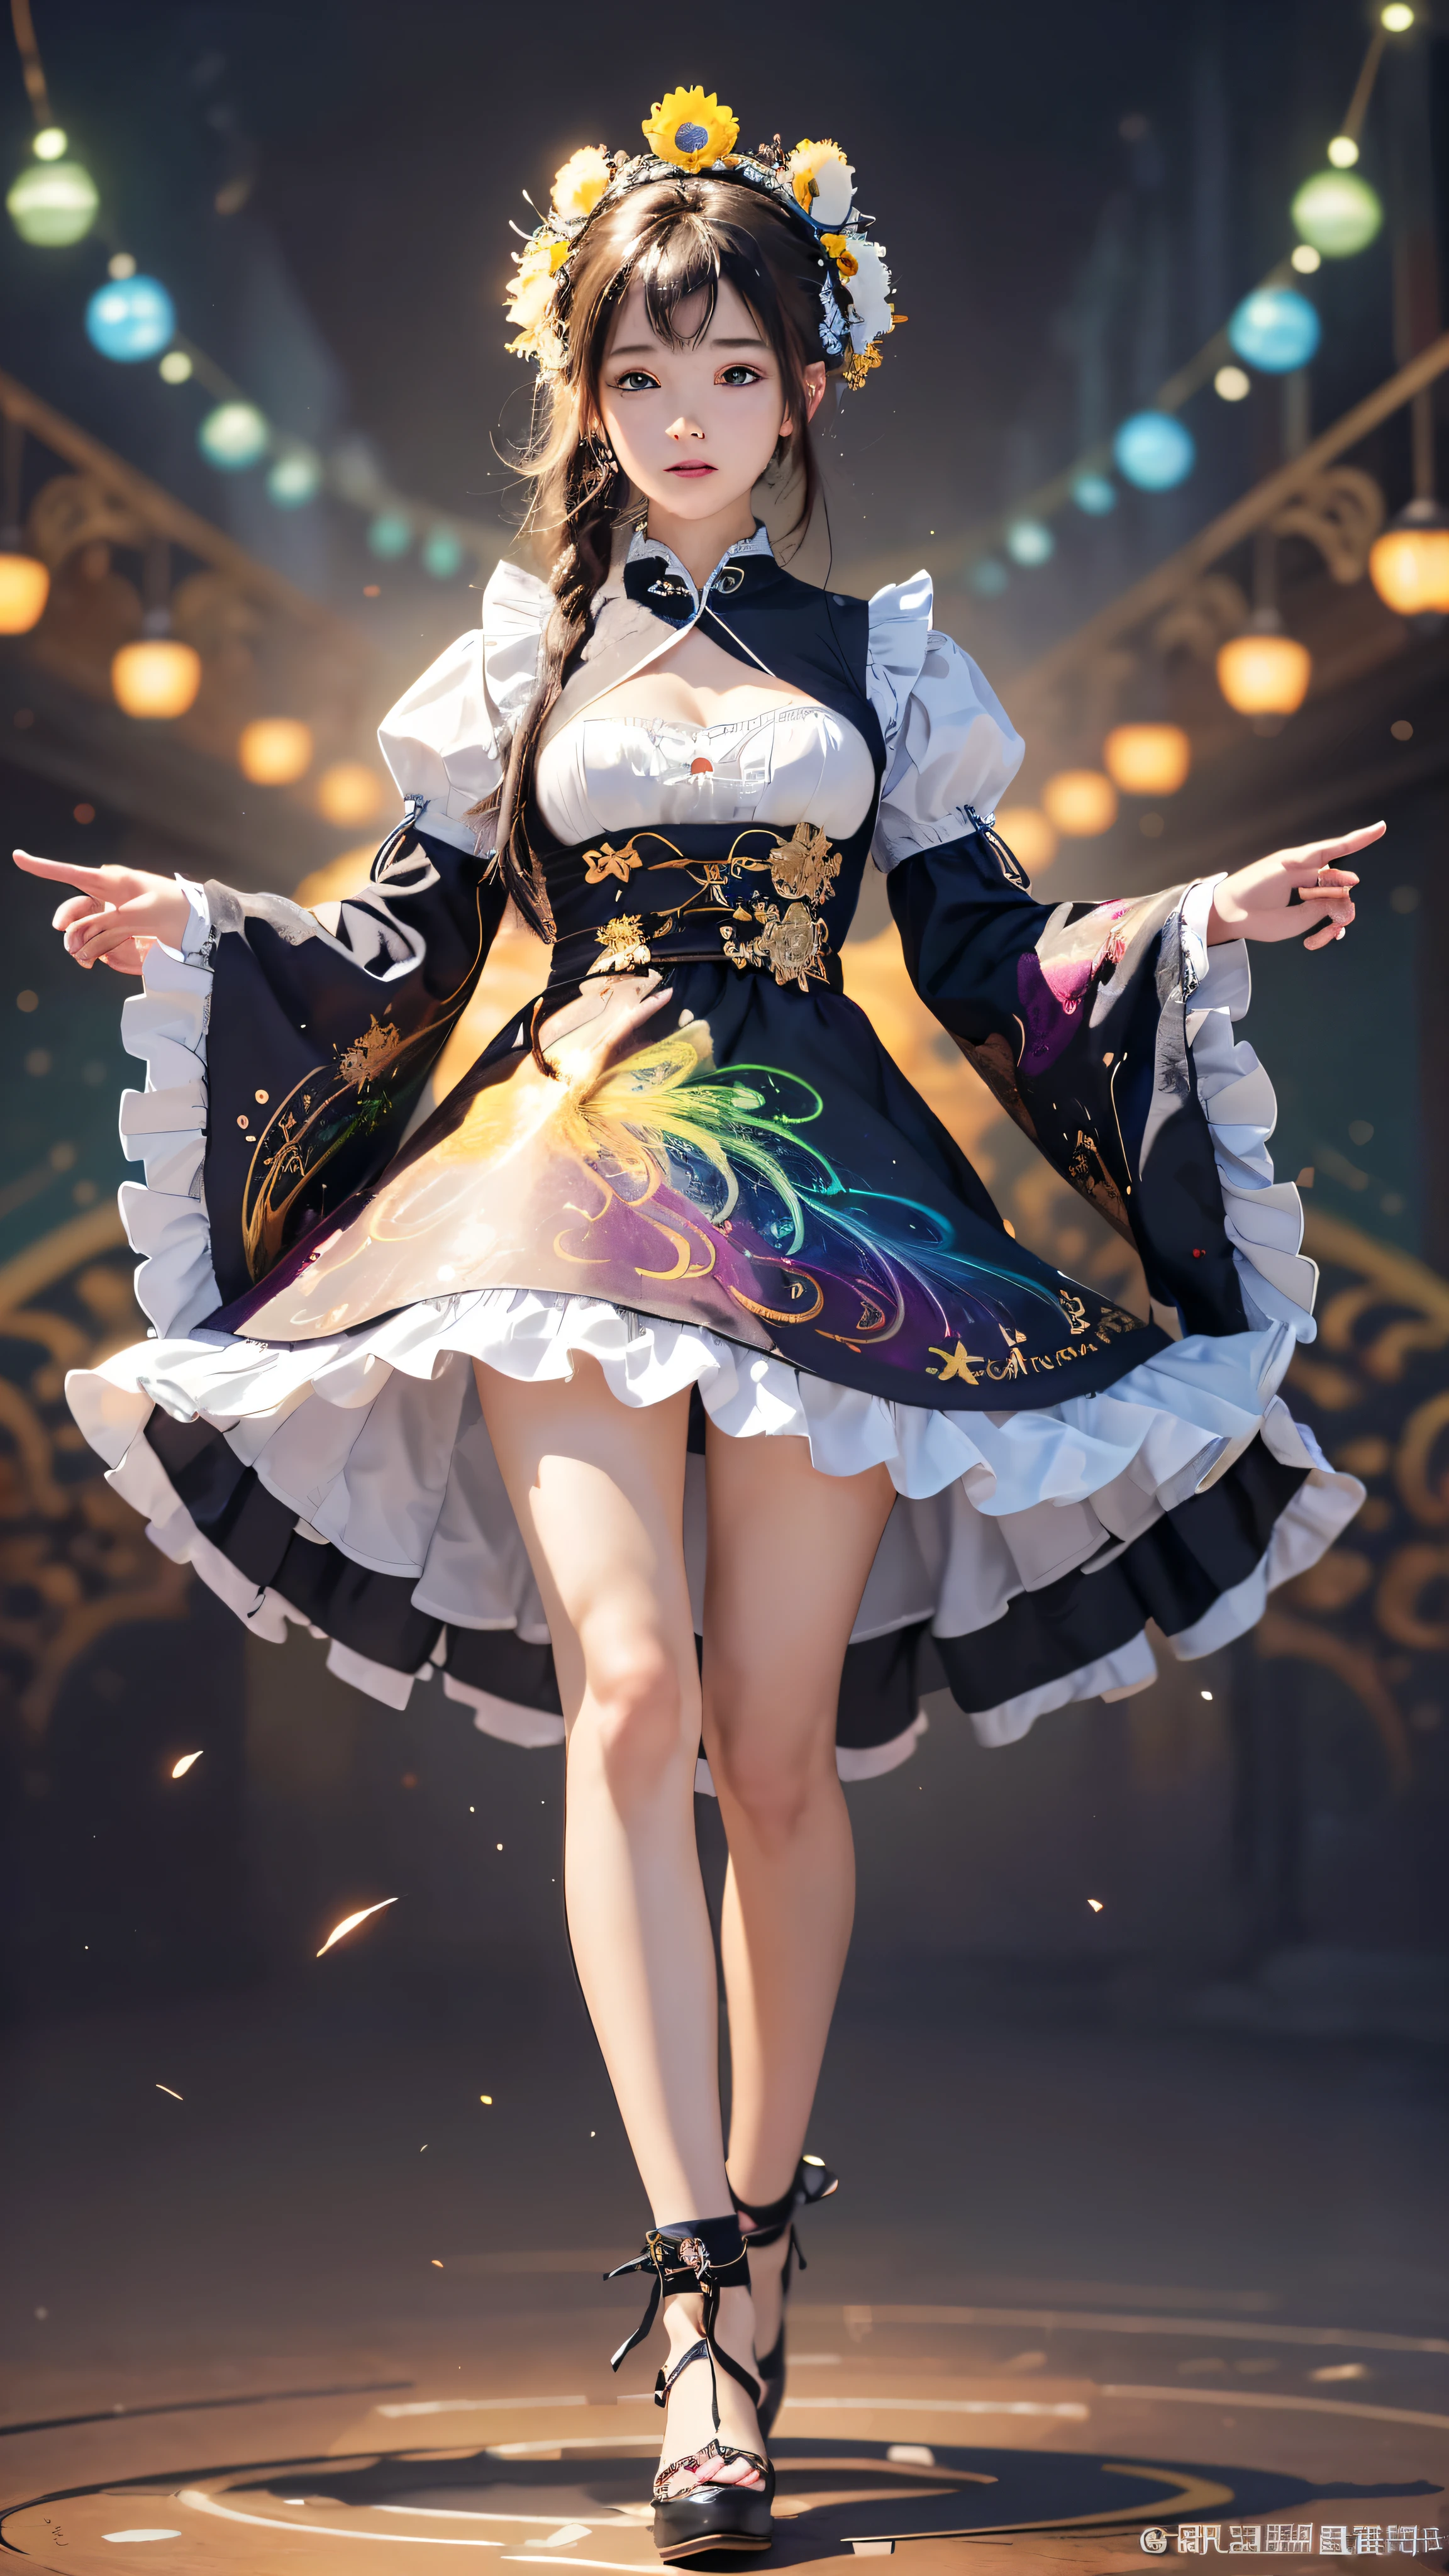 with high definition imageasterpiece、highest quality、highest quality、Official Art、Beautiful and aesthetic:1.2)、(1 Girl:1.3)、Details of the apron only outfit、(Fractal Art:1.2)、Vivid and rich colors、(Highest detail:1.4)、(Zentangle:1.2)、(Motion Capture:1.5)、(Abstract background、Bursting with color:1.5)、(Beauty in an apron:1.2)、(Shiny skin、Shining under the light:1.3)、(Many colors、harmonious blend:1.4)、 Focus on facial expressions and details。Full body high quality images